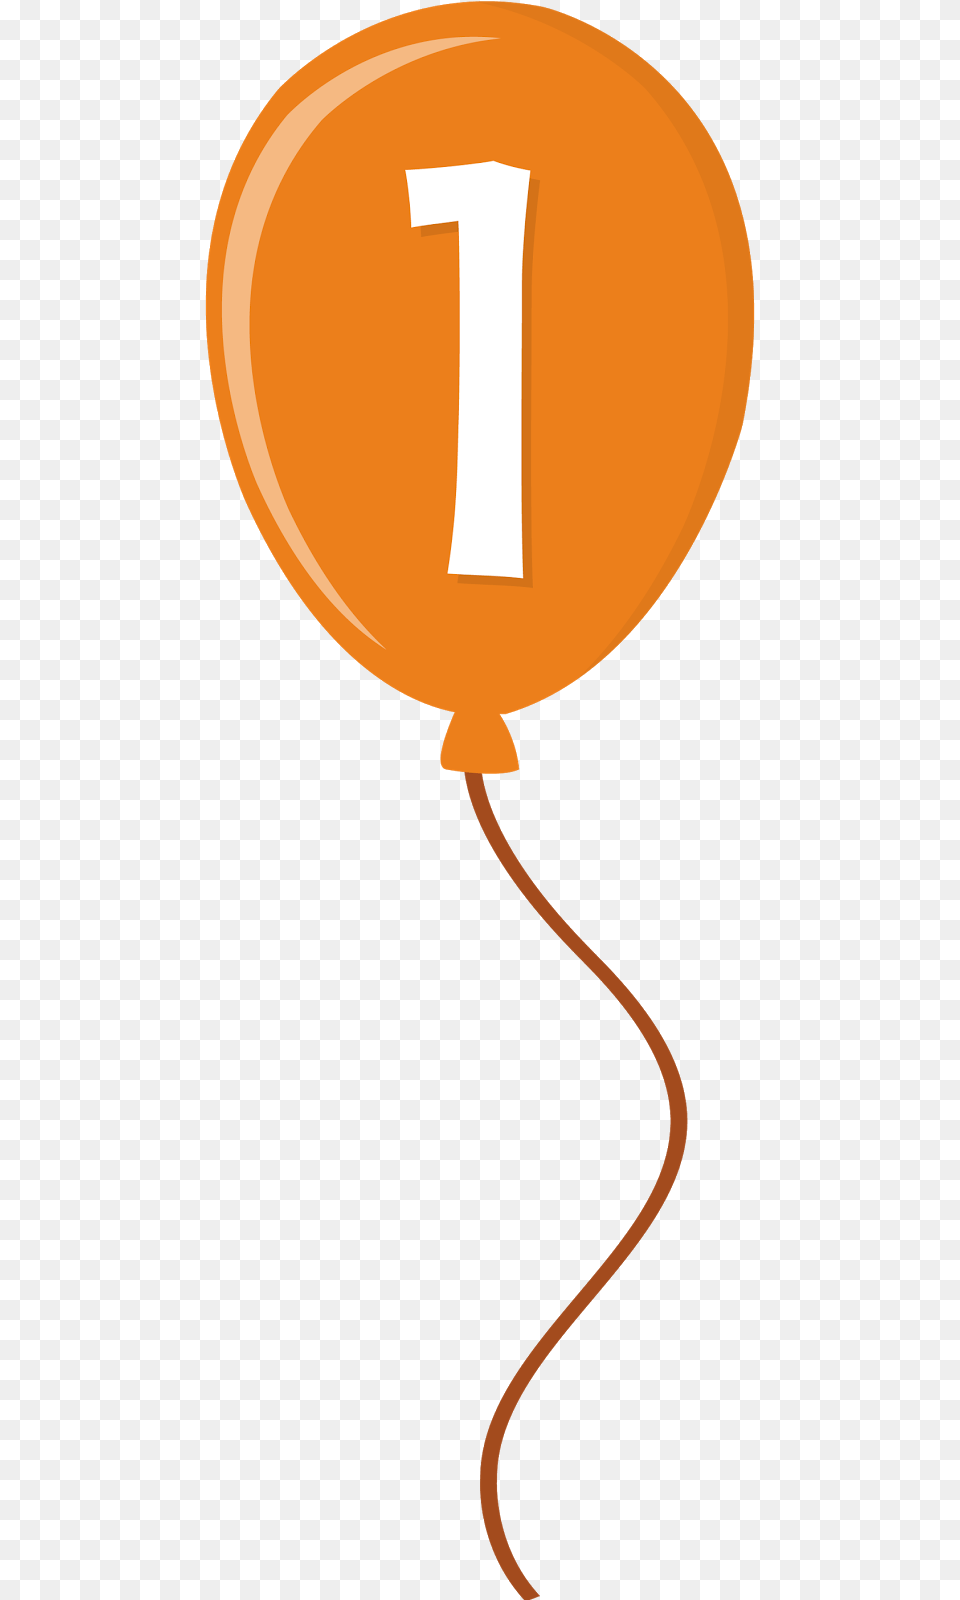 Balloon Number Clipart Png Image